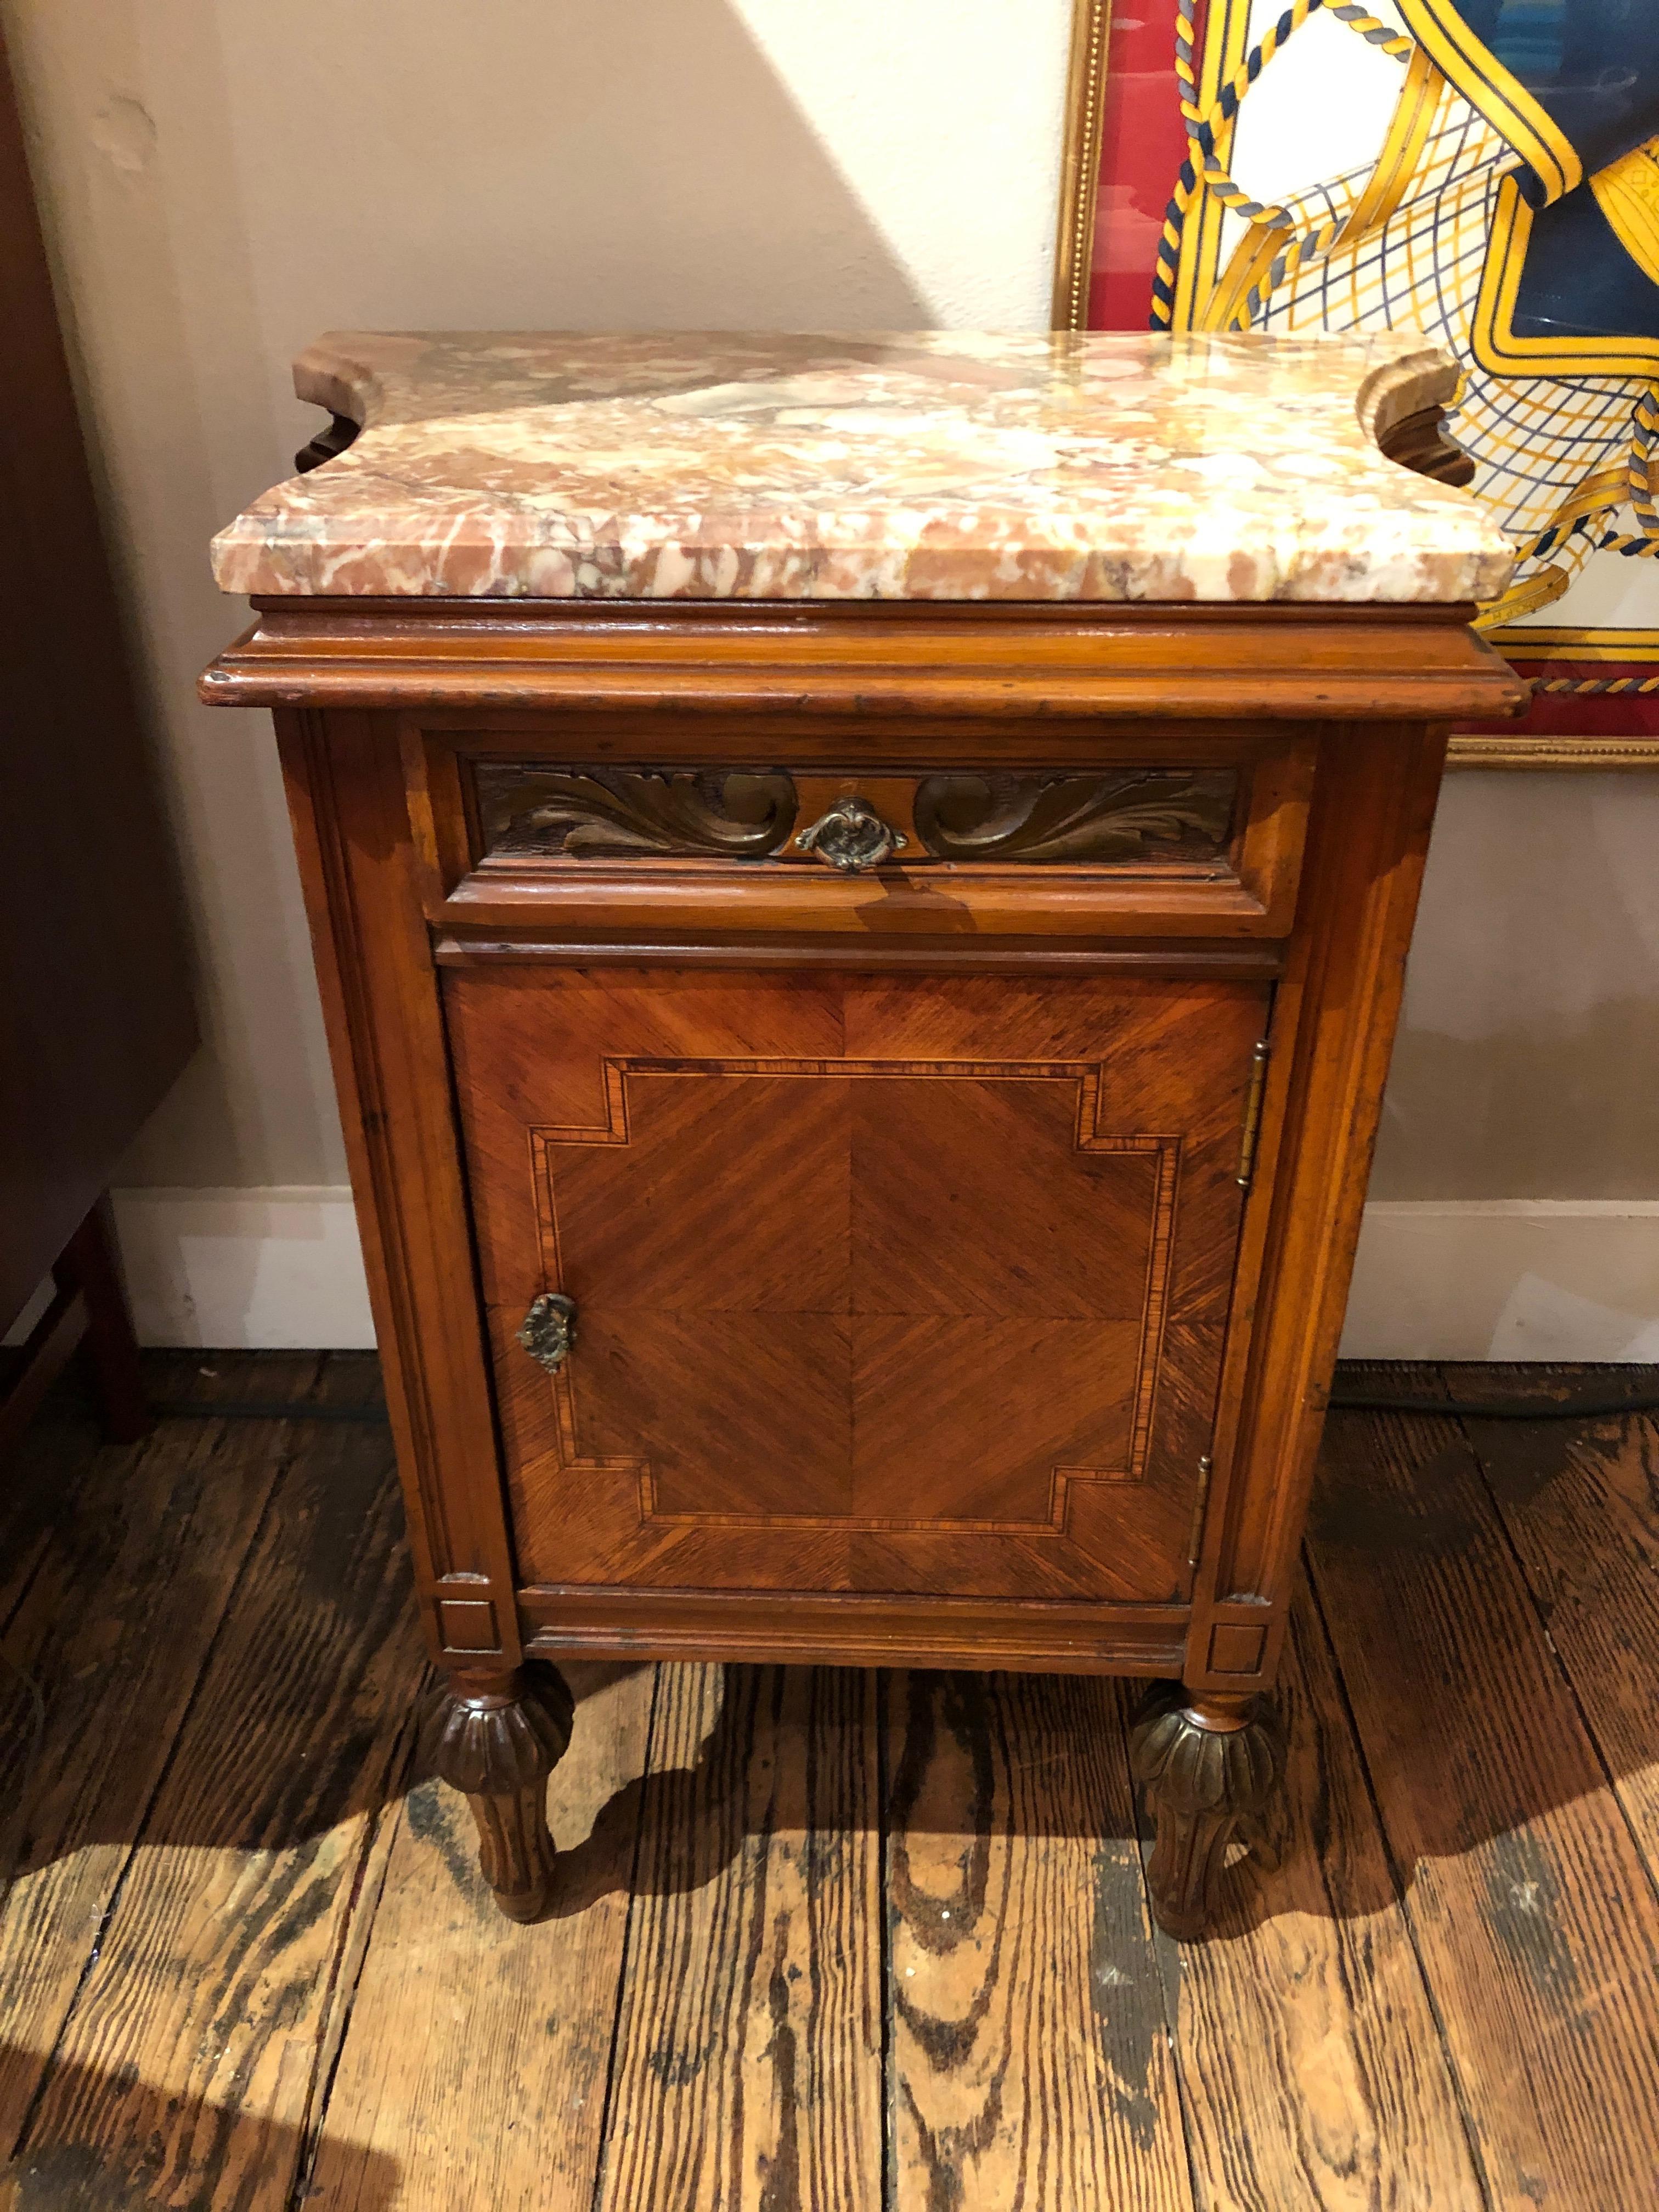 A perfect size single night stand or end table having a scalloped cream and rust colored marble top, lovely carved and inlaid mahogany base, drawer and panel door with storage inside. Very pretty feet with carved spheres.